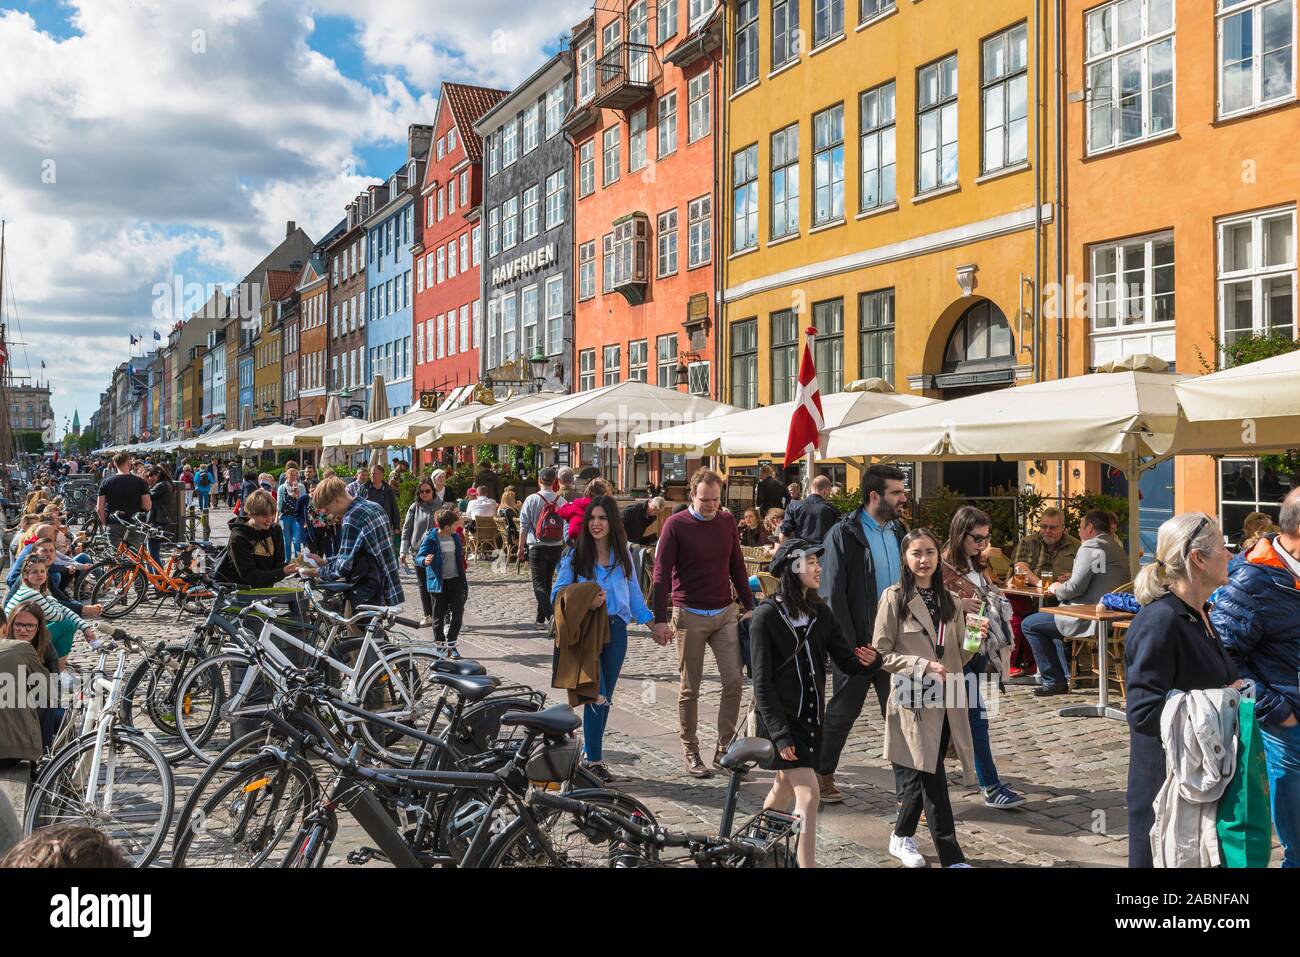 Copenhagen Denmark, view of tourists strolling along the cafe lined quayside in the colorful Nyhavn harbor area of Copenhagen, Denmark. Stock Photo